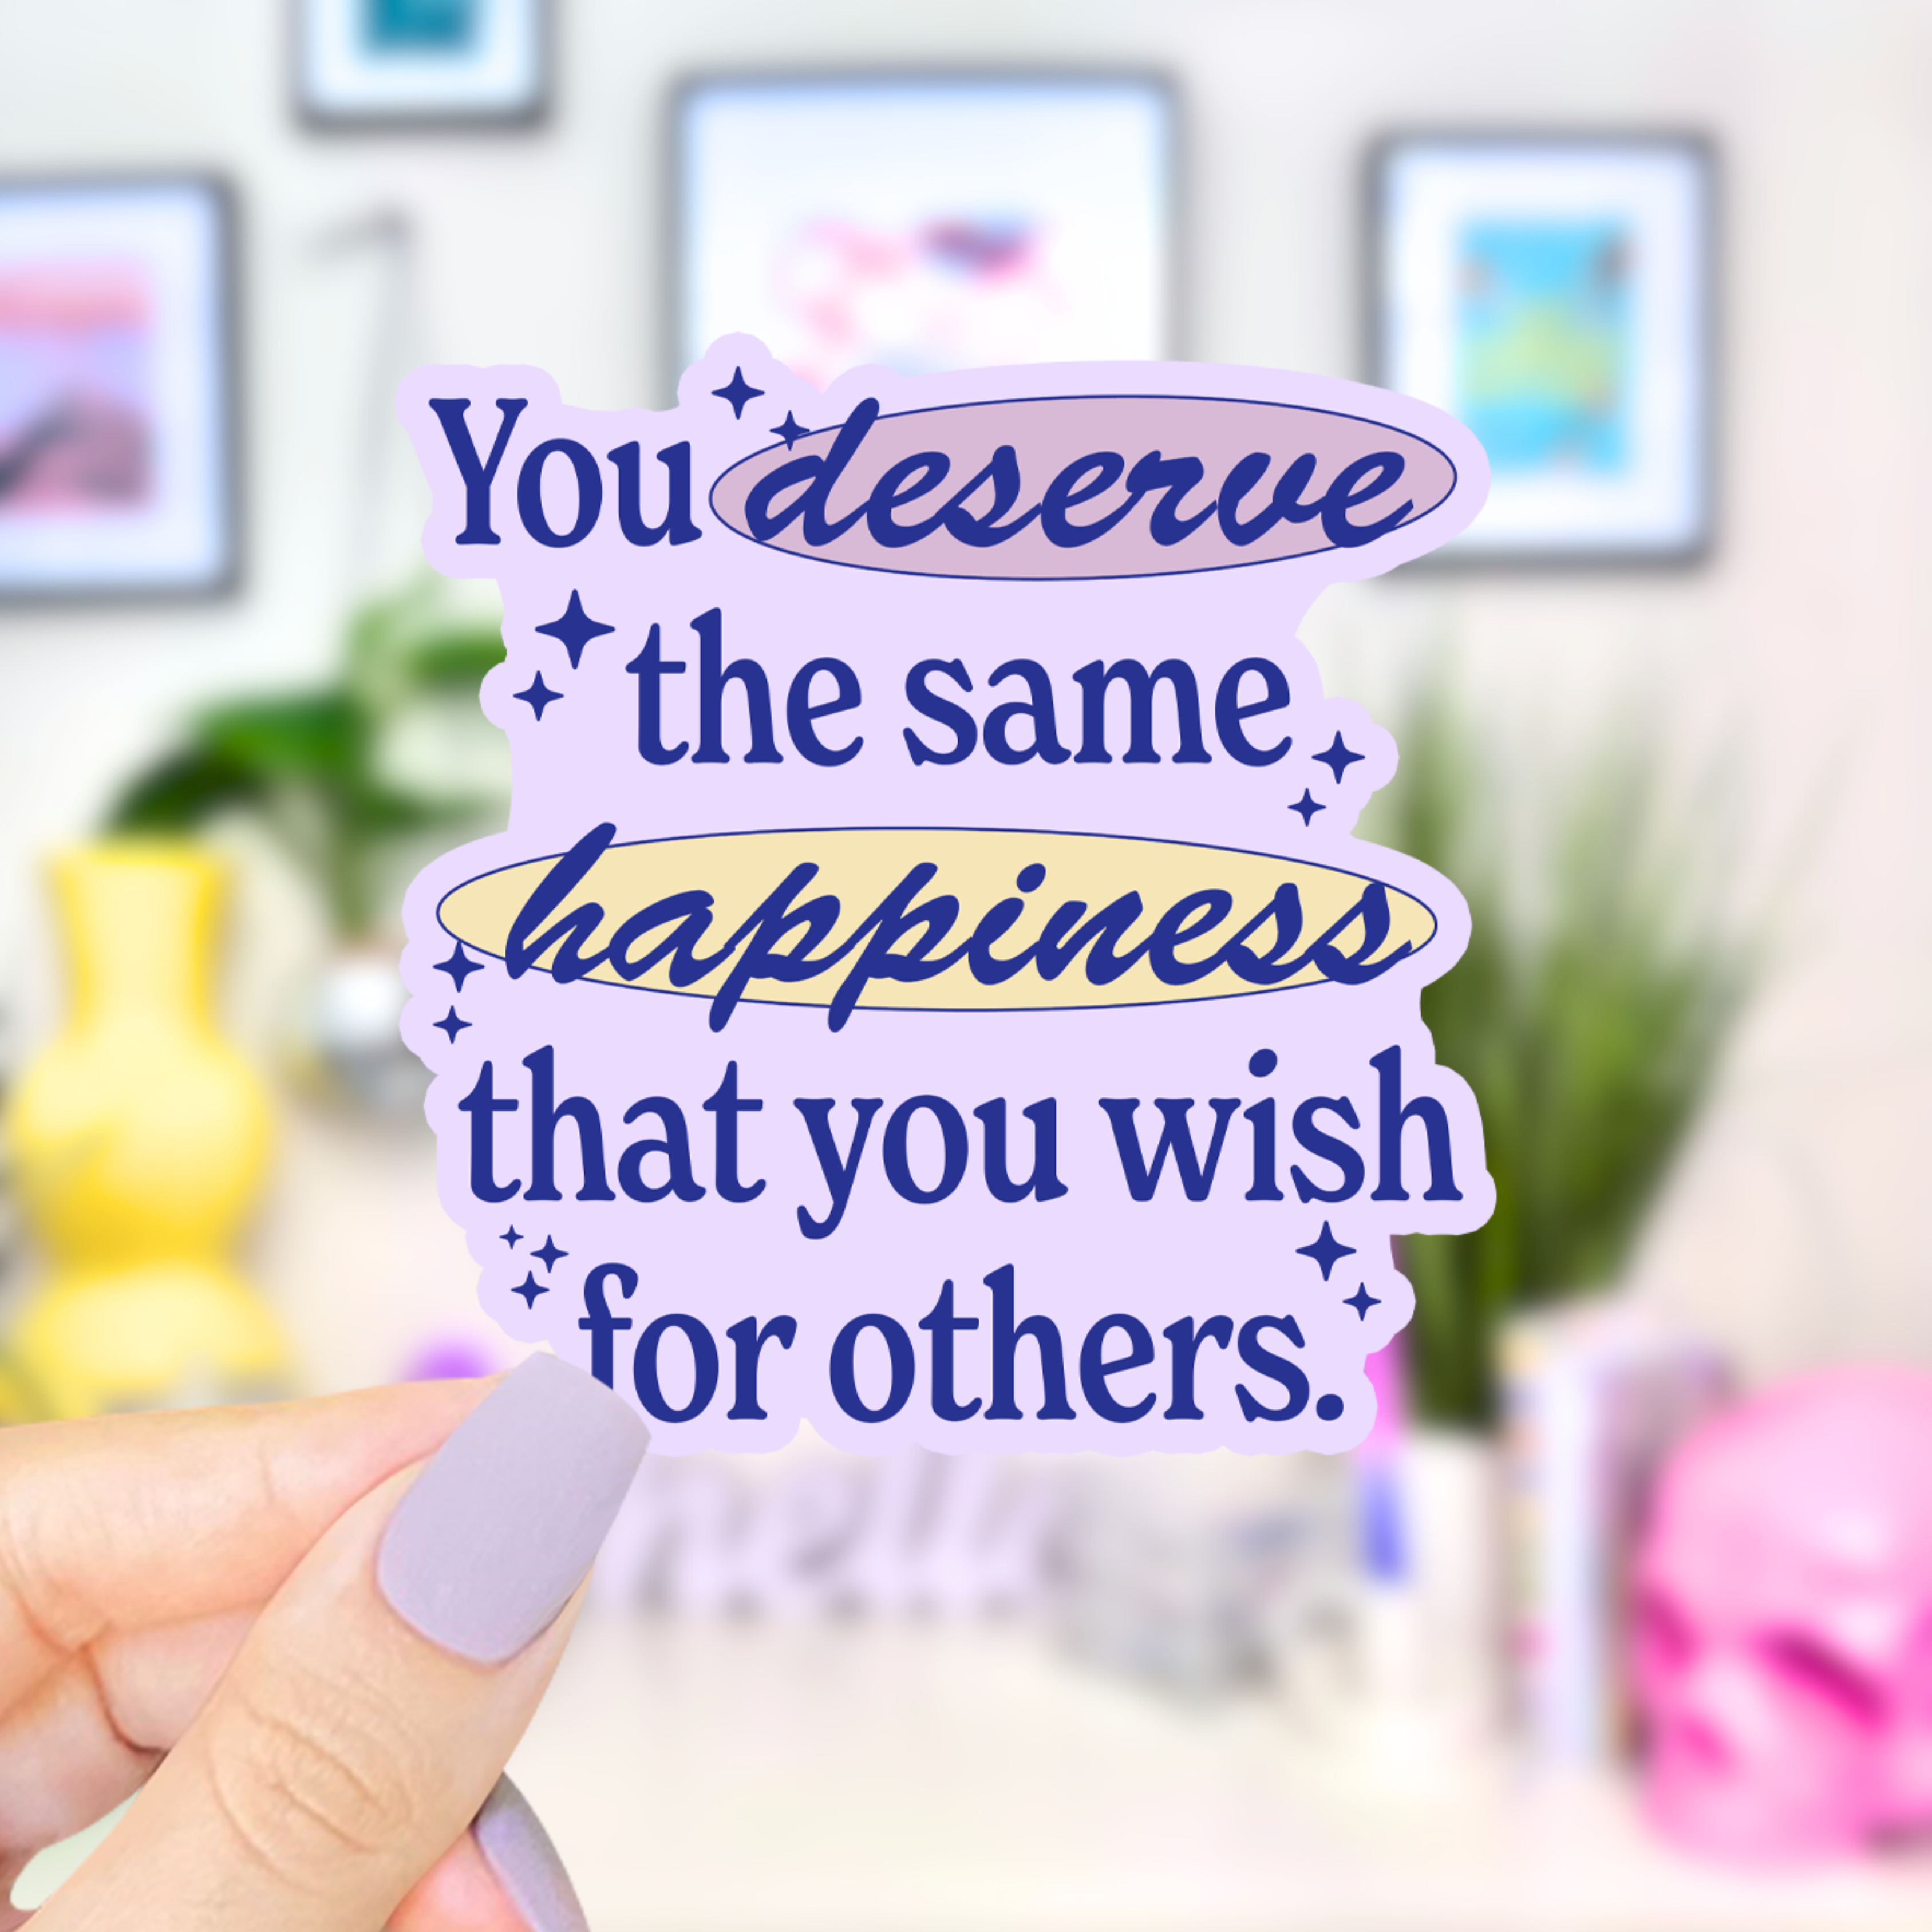 Shop You Deserve Happiness - Waterproof Vinyl Sticker-Stickers at Ruby Joy Boutique, a Women's Clothing Store in Pickerington, Ohio